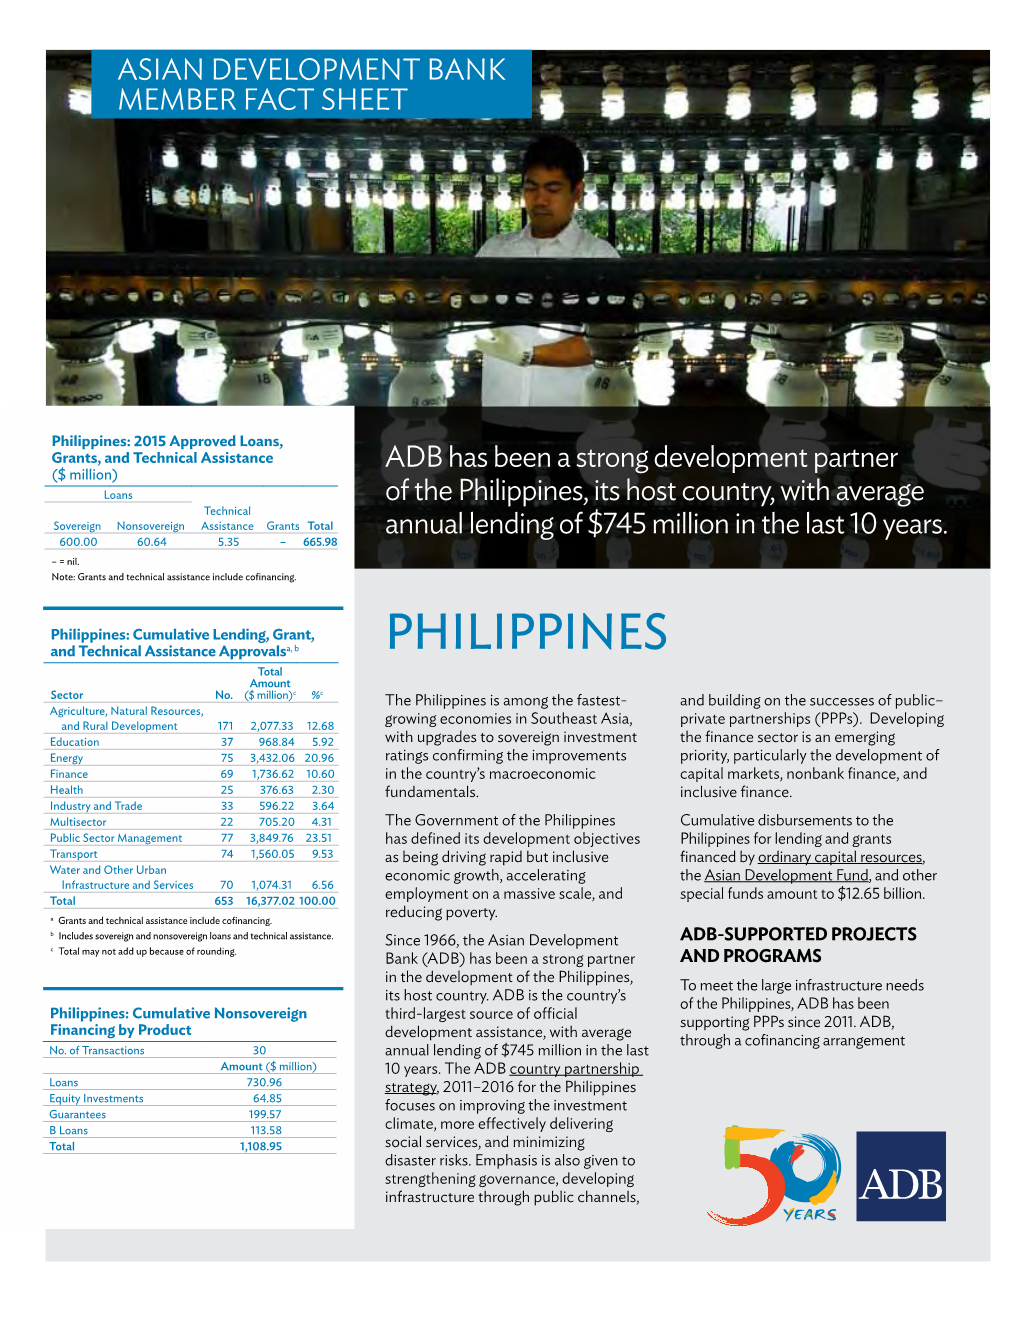 Asian Development Bank and the Philippines